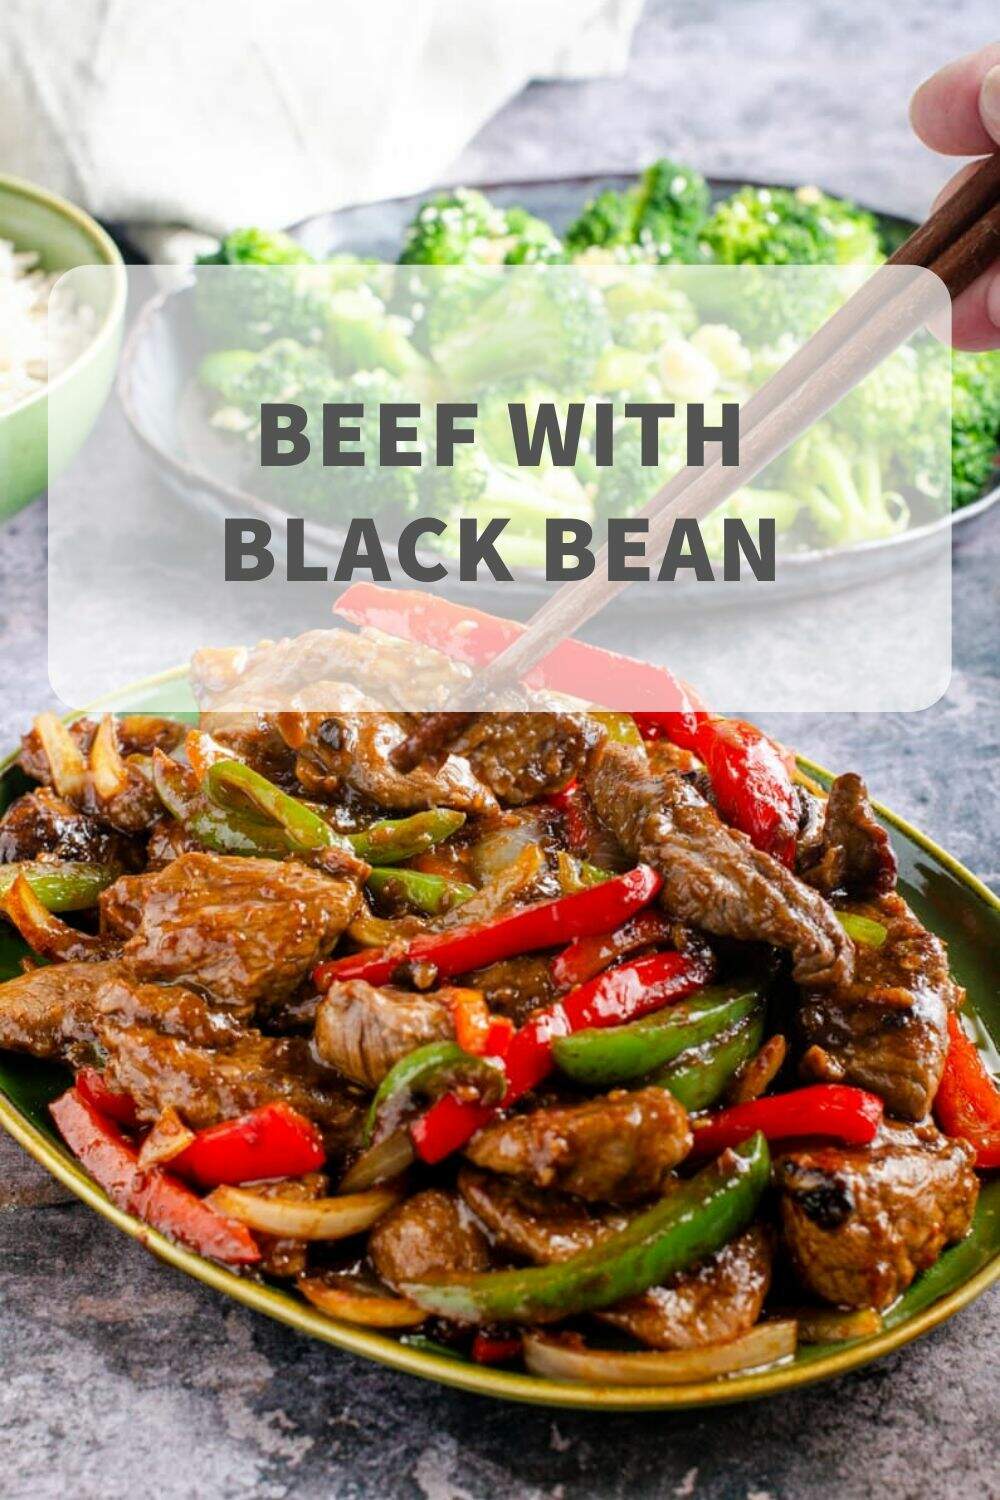 Simple and delicious and better than a takeout! This Asian style beef with black bean sauce uses lean cuts of beef stir fried with lots of vegetables and a sweet and subtly spiced black bean sauce. Perfect in place of your weekend takeaway.